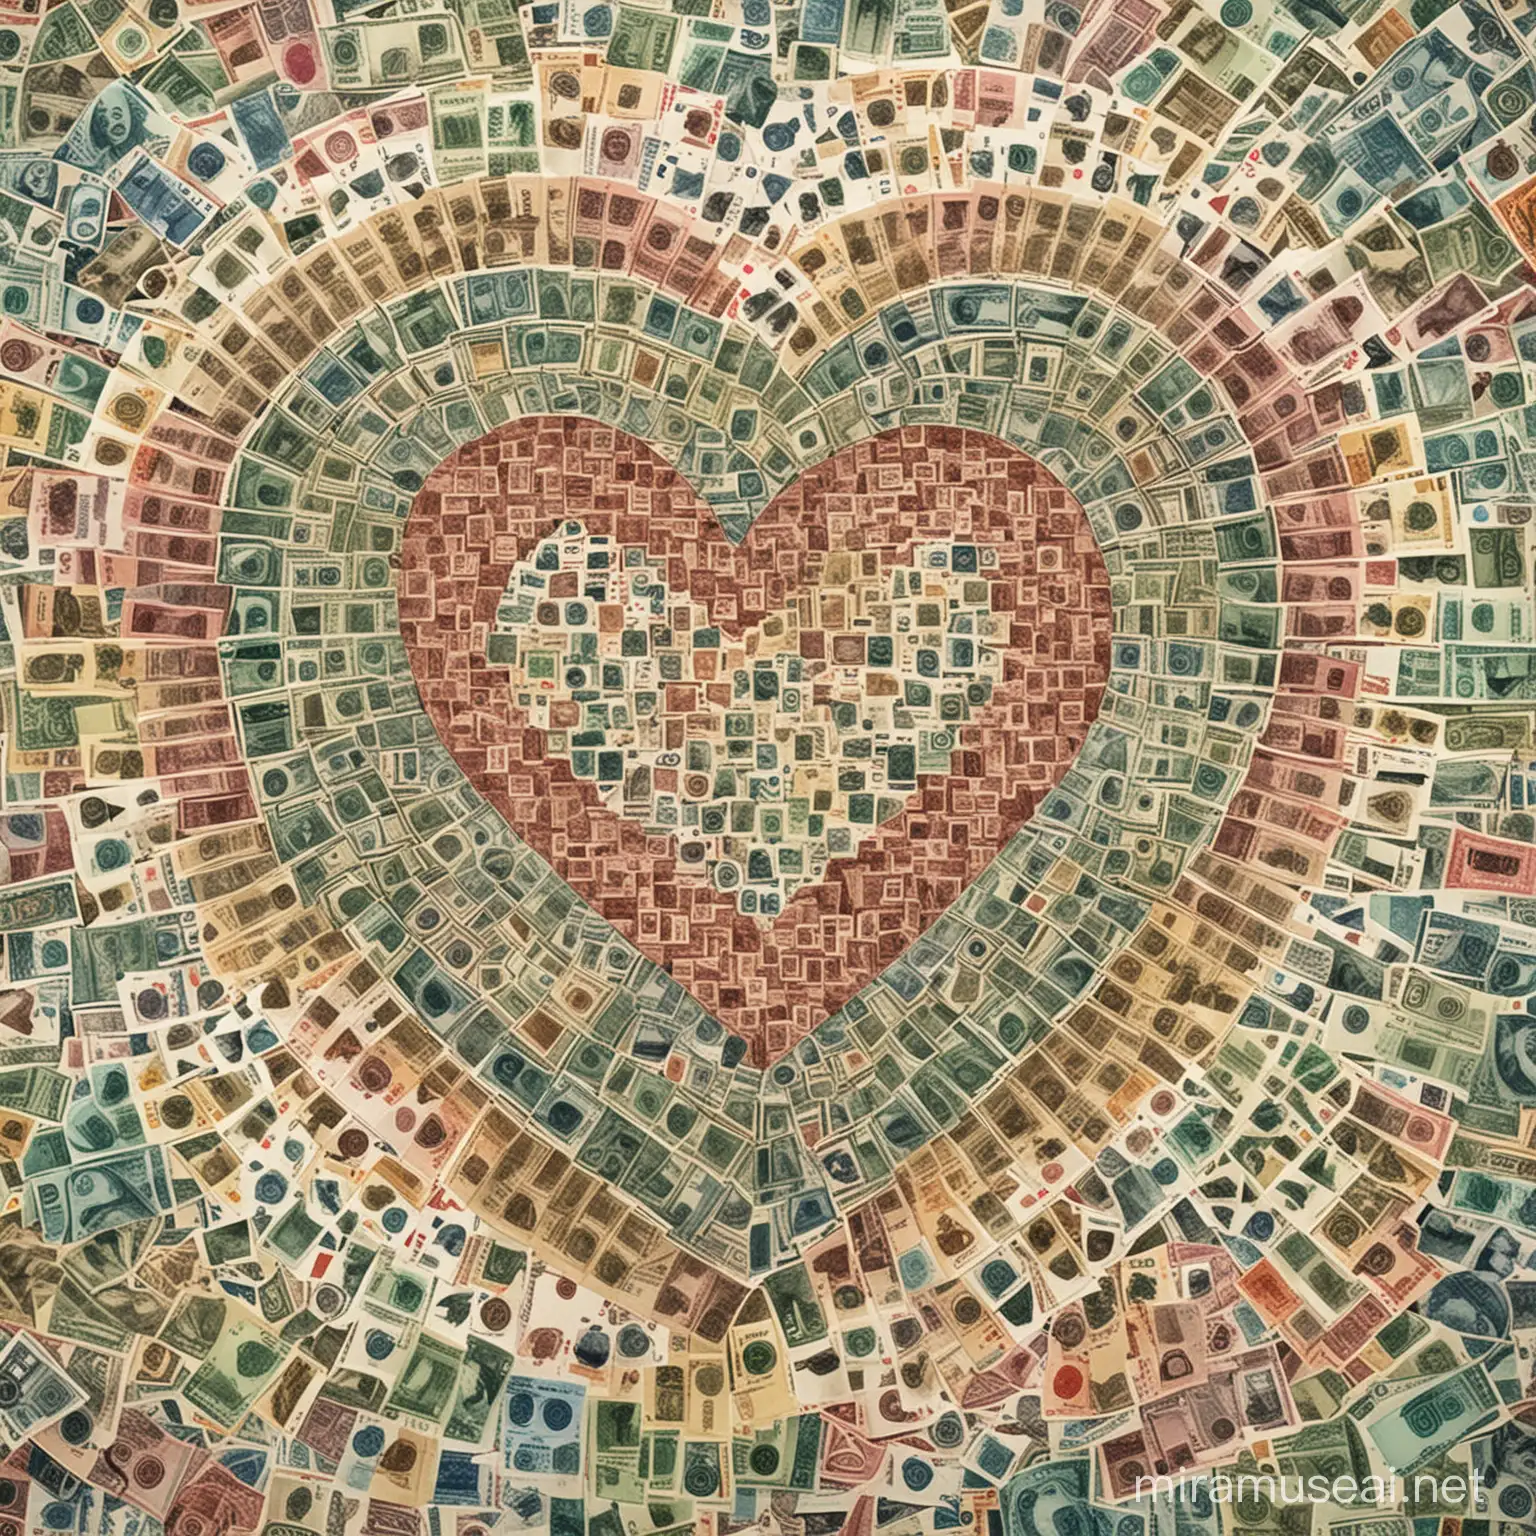 Imagine a striking composition where currency bills of various denominations and possibly from different countries are artistically arranged to form the shape of a heart. Each bill, with its distinct colors and shapes, is meticulously positioned to create the illusion of a heart when combined, showcasing a harmonious blend of monetary symbols that transcend borders and cultures. The bills, with their vibrant hues and intricate designs, come together seamlessly to depict the outline of a heart, symbolizing unity, love, and perhaps the universal value of currency in our interconnected world. The colors of the bills, ranging from rich blues and greens to warm yellows and reds, create a visually captivating display against a neutral background, allowing the unique characteristics of each bill to shine through. While the specific denominations and countries represented by the bills remain unspecified, the focus is on the artful arrangement that transforms individual currencies into a collective symbol of affection and solidarity. This creative composition serves as a reminder of the universal language of currency and the potential for financial systems to foster connections and understanding across diverse nations and societies. The overall image is designed to evoke a sense of beauty, unity, and the intrinsic value of currency as a reflection of shared human experiences and aspirations. It celebrates the artistry and symbolism inherent in our monetary systems, transcending geographical boundaries to highlight the common threads that unite us all, 32k render, hyperrealistic, detailled.